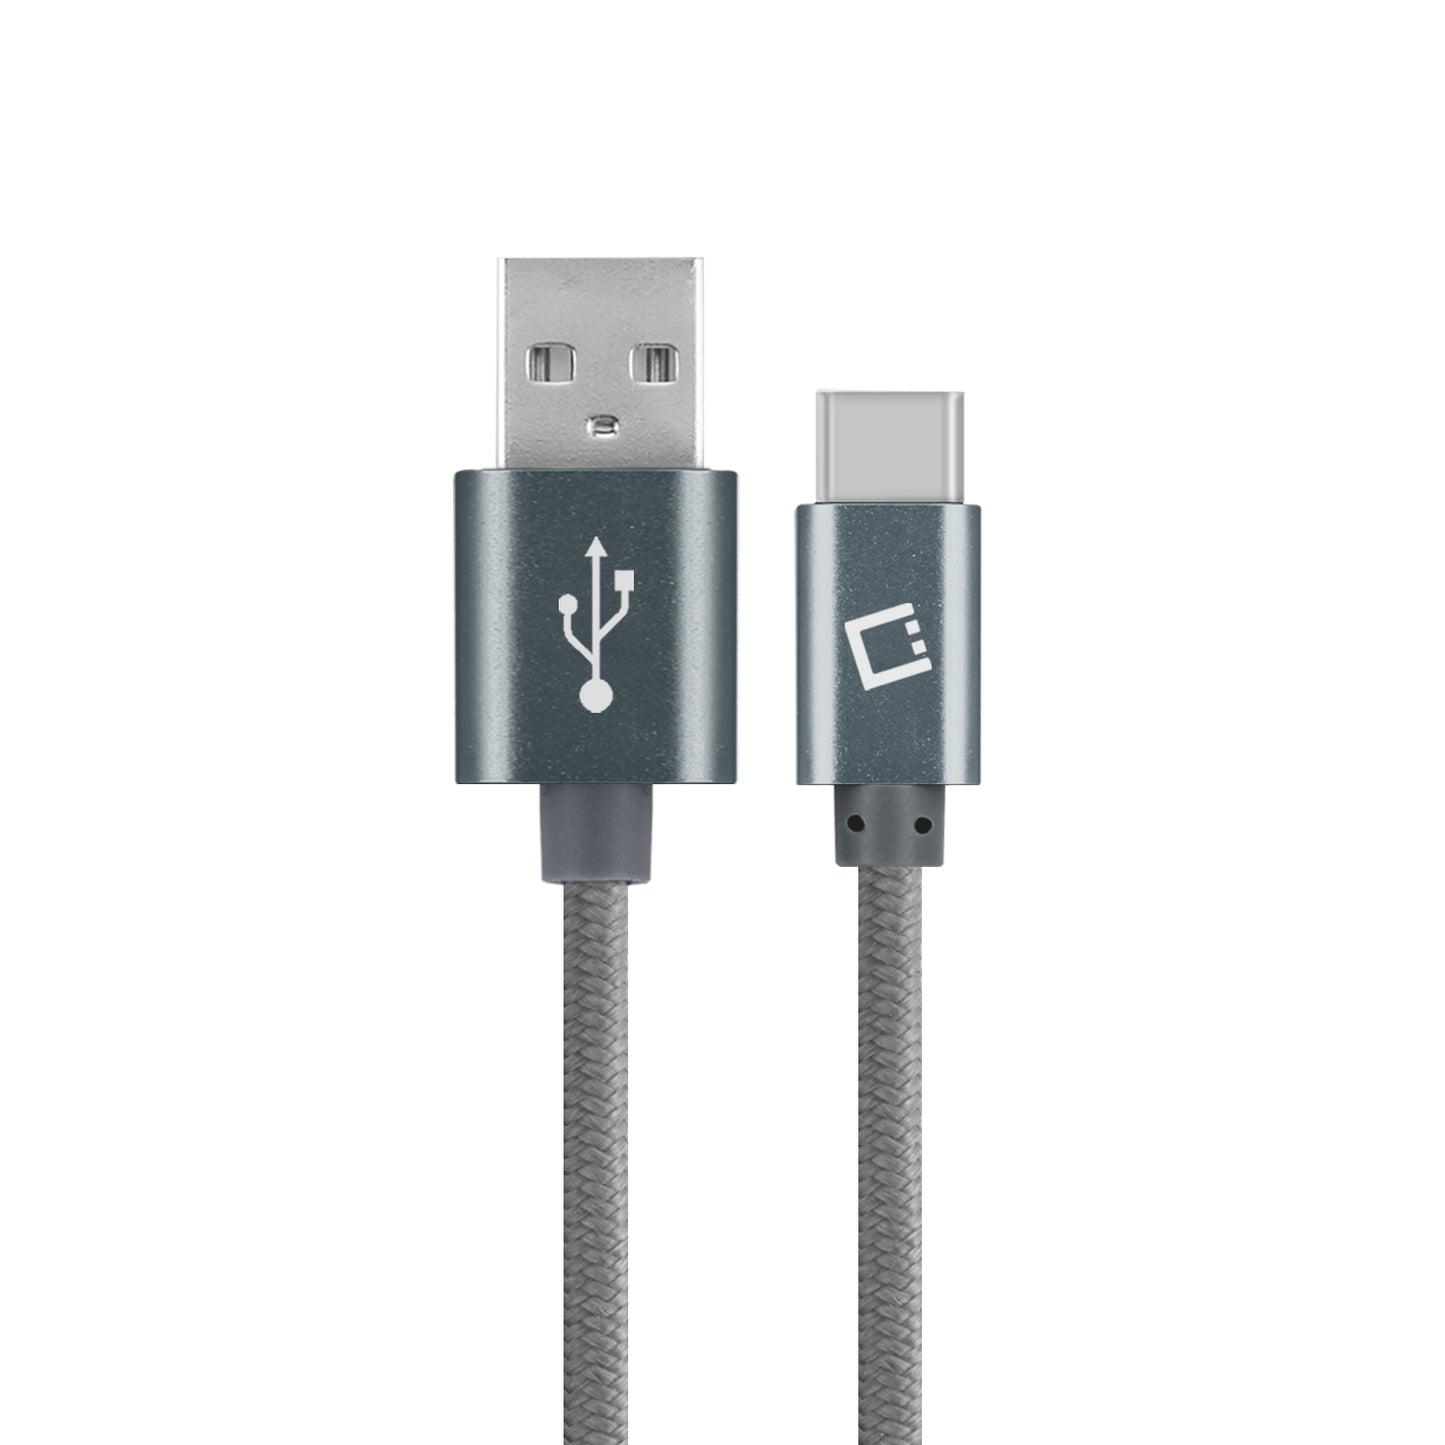 DCA620GY - Type-C Cable, Cellet 6ft (1.8m) Heavy Duty Nylon Braided USB-A to USB-C